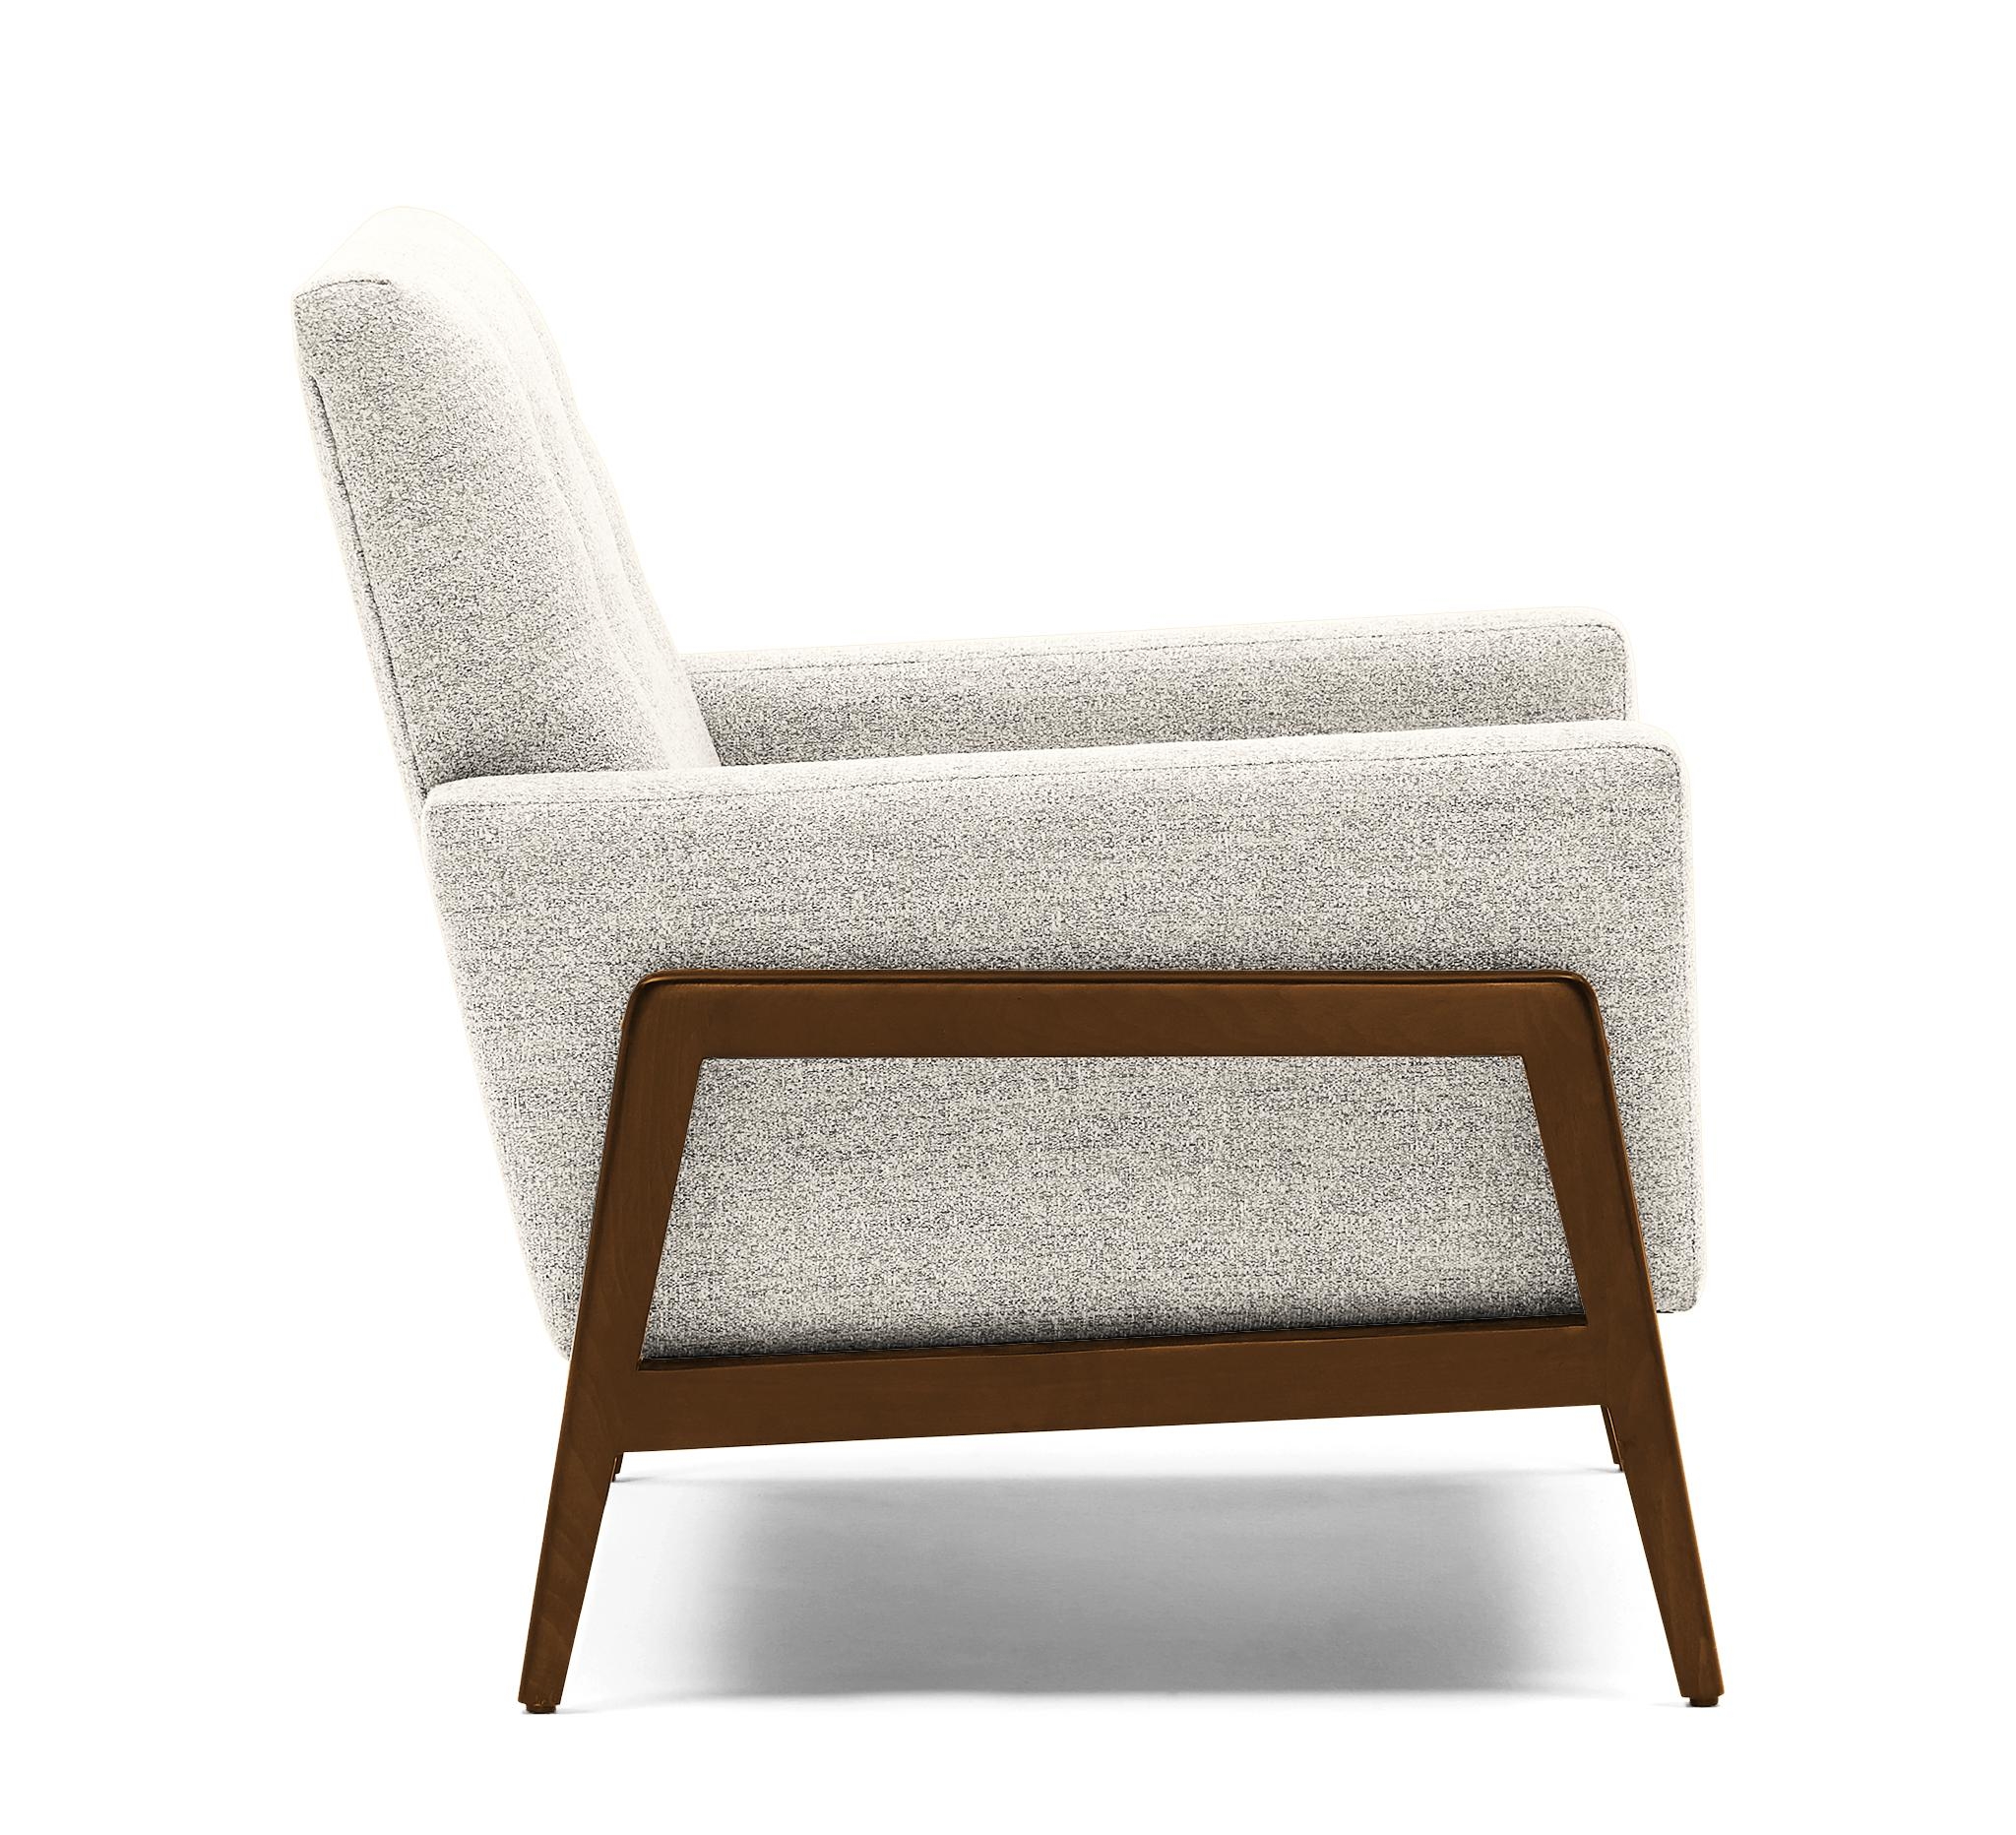 White Clyde Mid Century Modern Chair - Tussah Snow - Mocha - Image 2